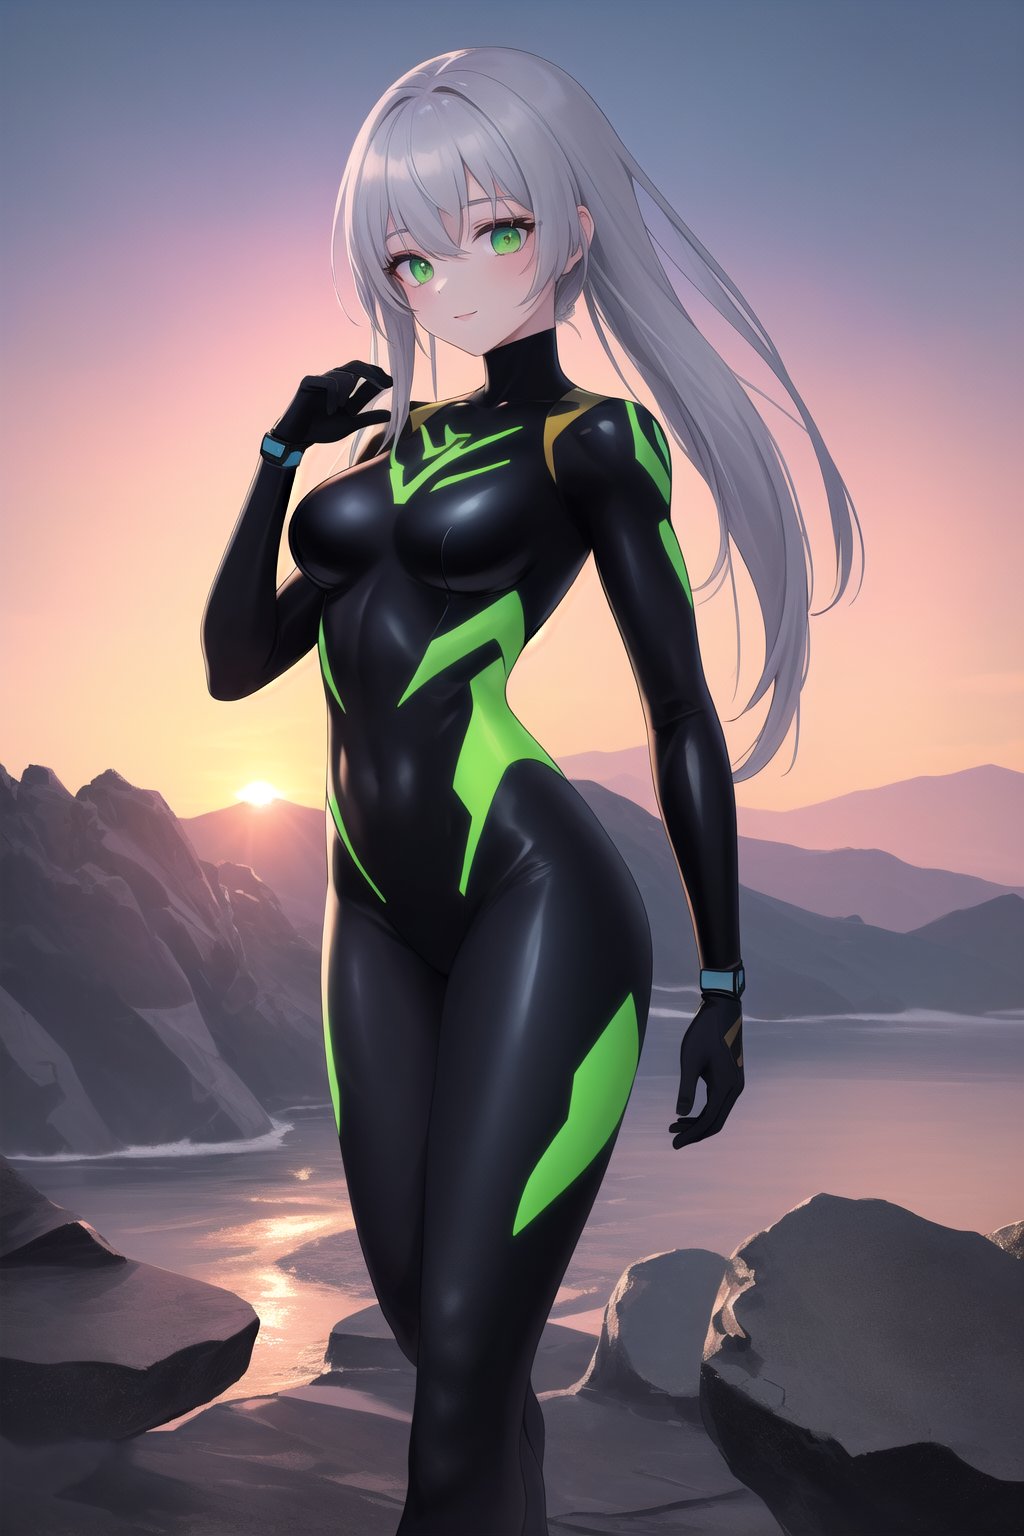 

Depict a stunning 25-year-old female figure wearing a skin-tight intricately complex cybernetic bodysuit with a black and silver body made of brushed titanium and polished tungsten. She is empty-handed.  Her face, with vivid kelly-green eyes, has a confident expression, while her athletic body showcases muscle definition (0.5) and wide hips (1.6). Medium breasts are subtly accentuated by the fitted suit. The figure stands in a contrapposto pose, one leg slightly bent, wearing stiletto heels that seem to defy gravity. ((3/4 view))

Set against a breathtaking rocky barren landscape without buildings and without structures, the model is framed within a beautiful sunset sky with hues of oranges, yellows, and pinks. The 8K resolution masterpiece features highly detailed textures, polished surfaces, and a tight focus that draws the viewer's eye to every aspect of this stunning image.